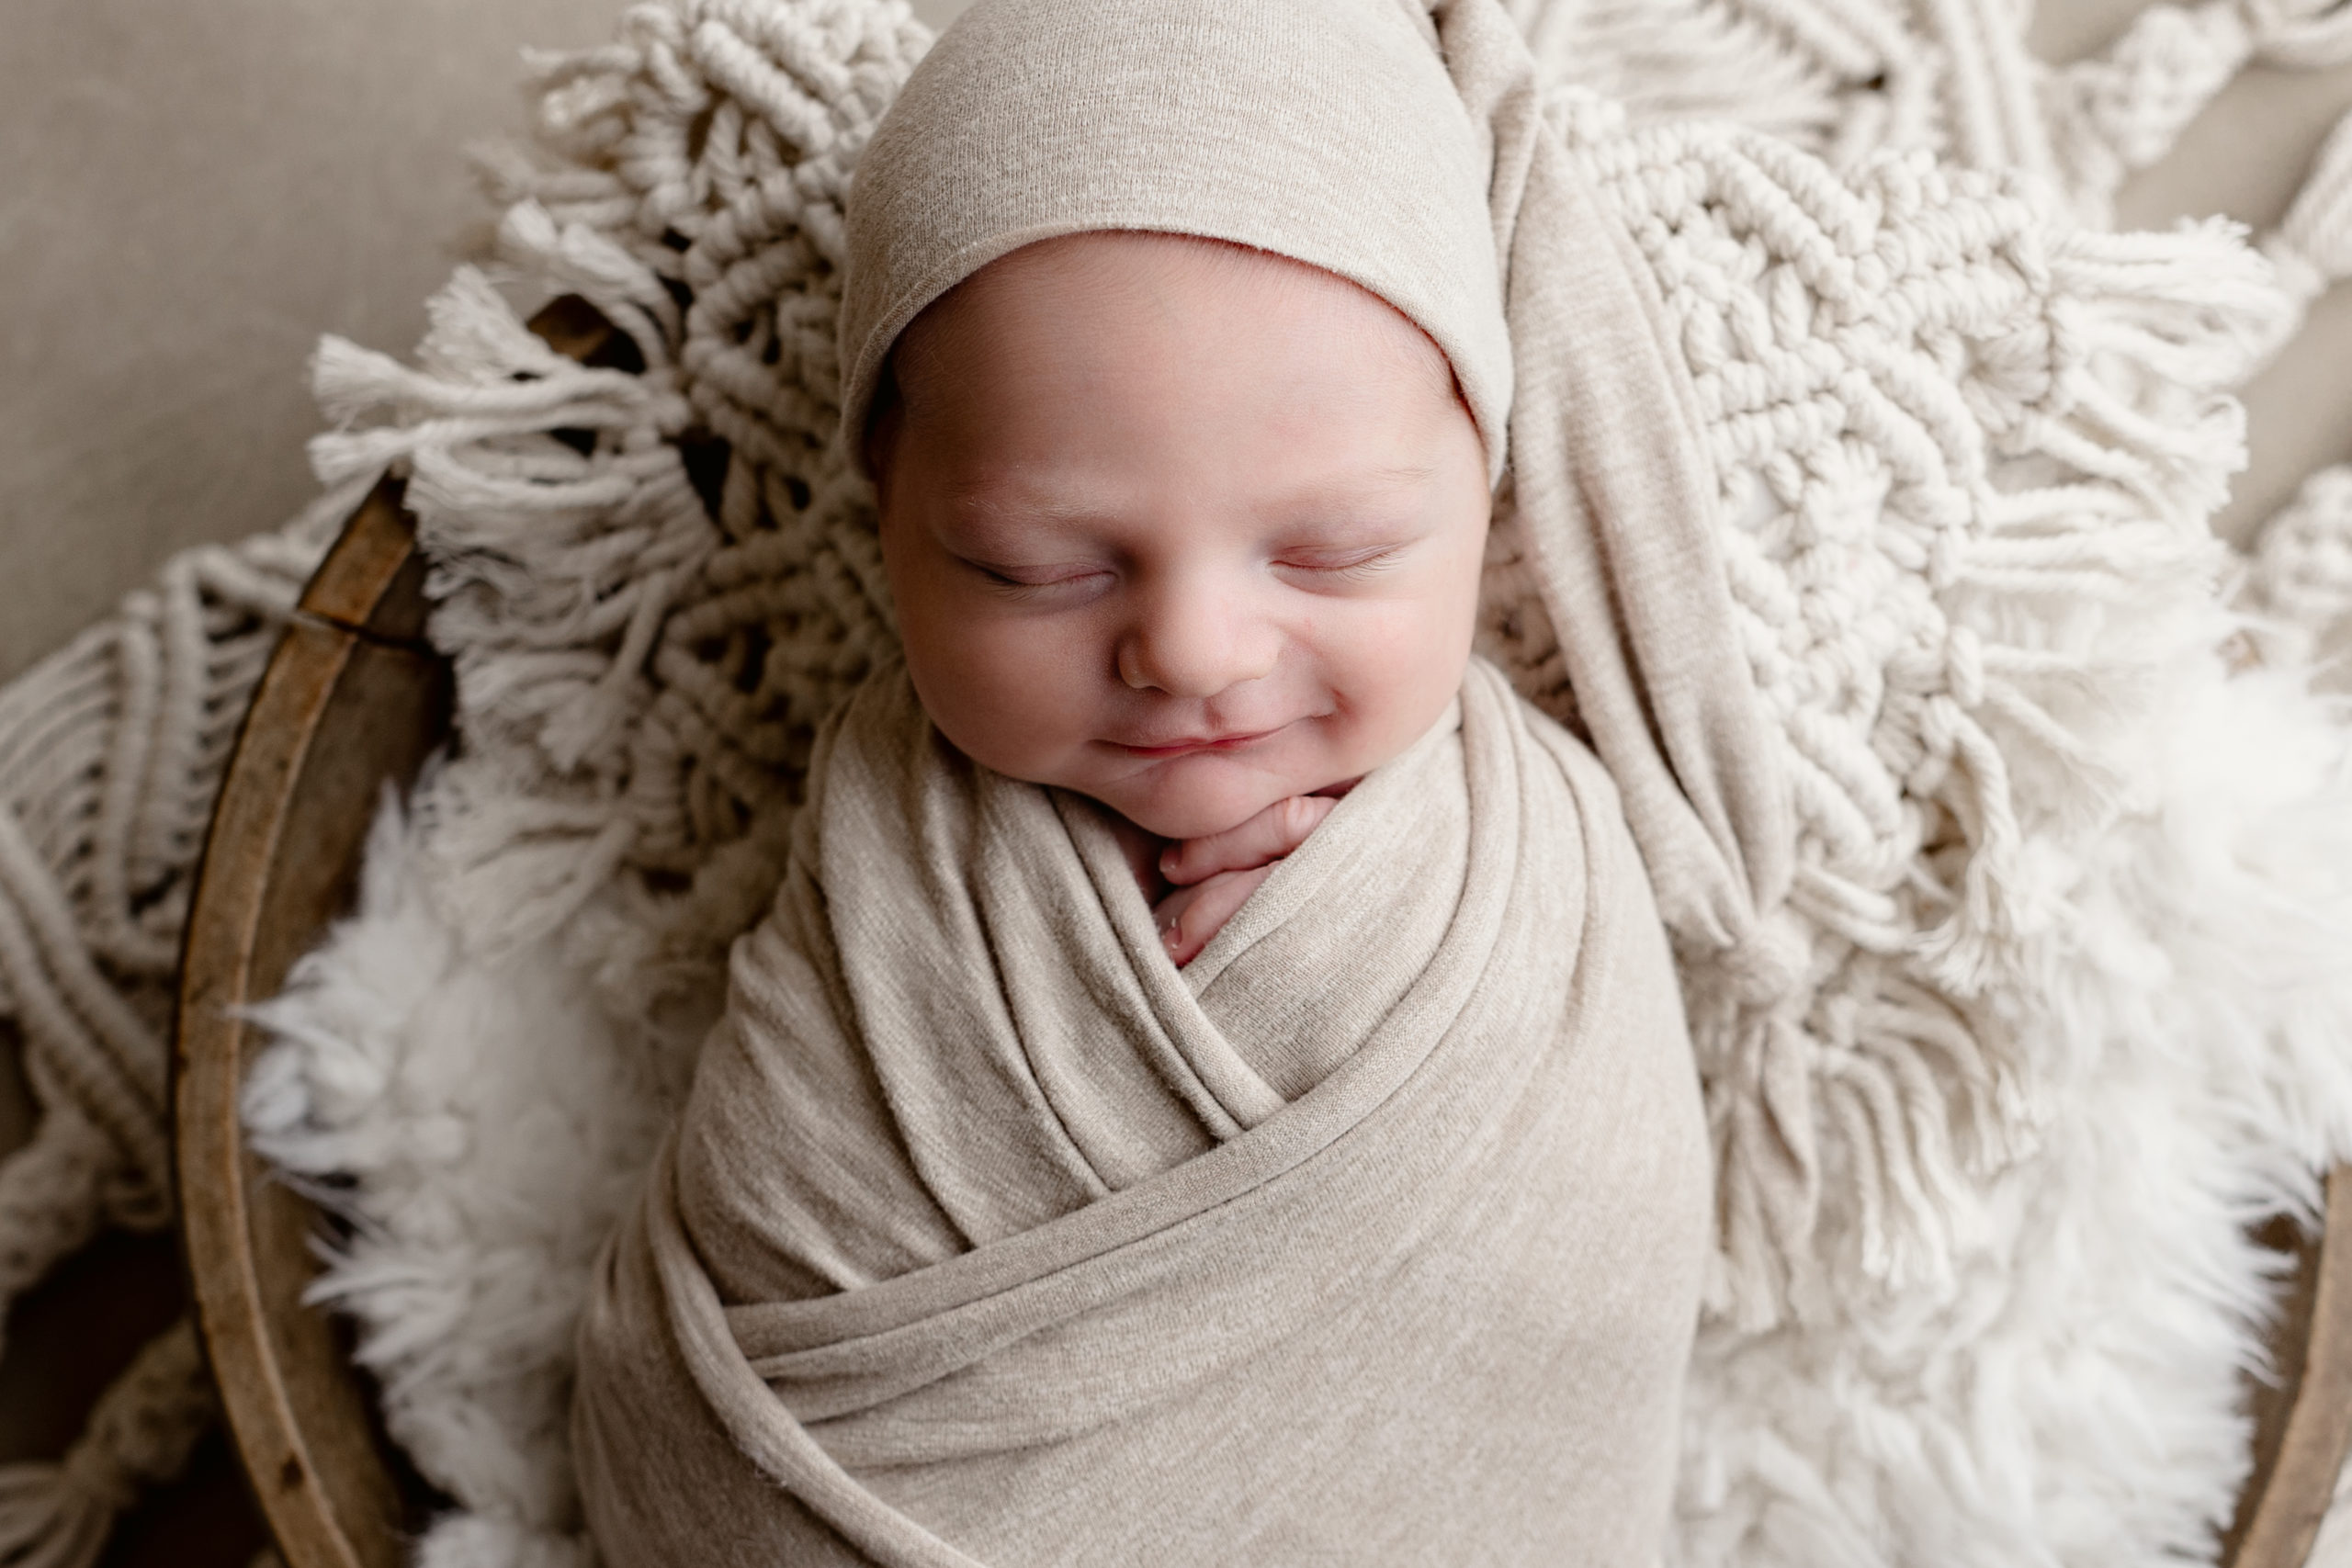 newborn baby boy smiling while wearing a tan sleepy cap with a tan blanket and macrame pillow during pictures with Milwaukee newborn photographer